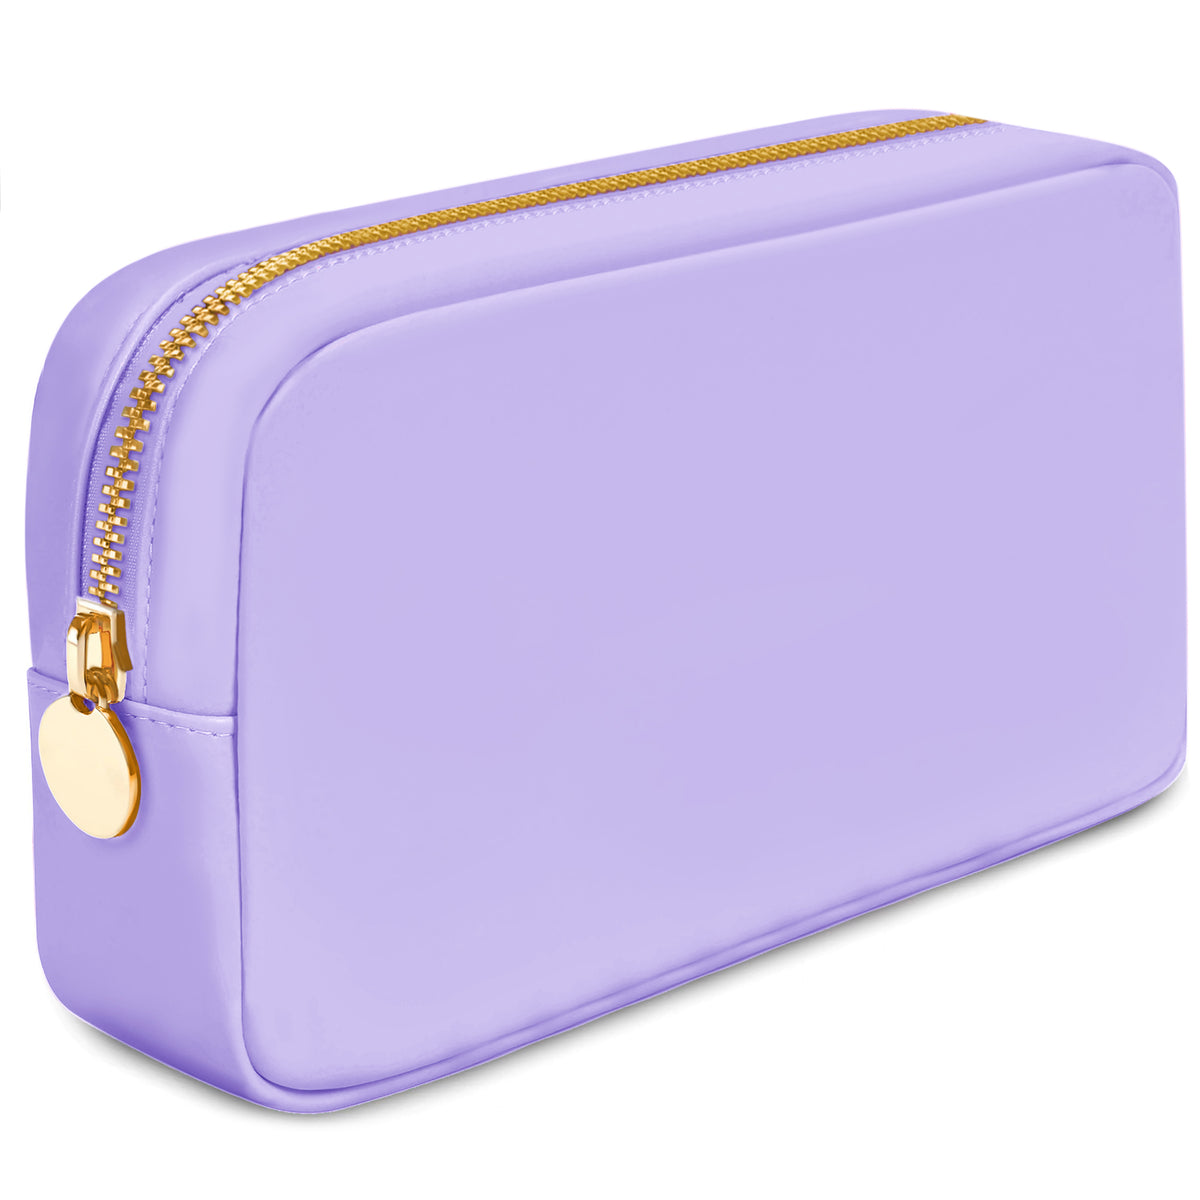 small toiletry bags for women toiletry bag for women small women toiletry bag small makeup bag for purse compact makeup bag car makeup bag make bag travel pouch for women cute travel toiletry bag small toiletry bag for women purple toiletry bag women small makeup travel bag small purple makeup bag for purse small medicine bag for purse purple zipper pouch purple makeup pouch small purse organizer pouch small make up pouch for purse makeup bag travel small school makeup bag purse pouch organizer